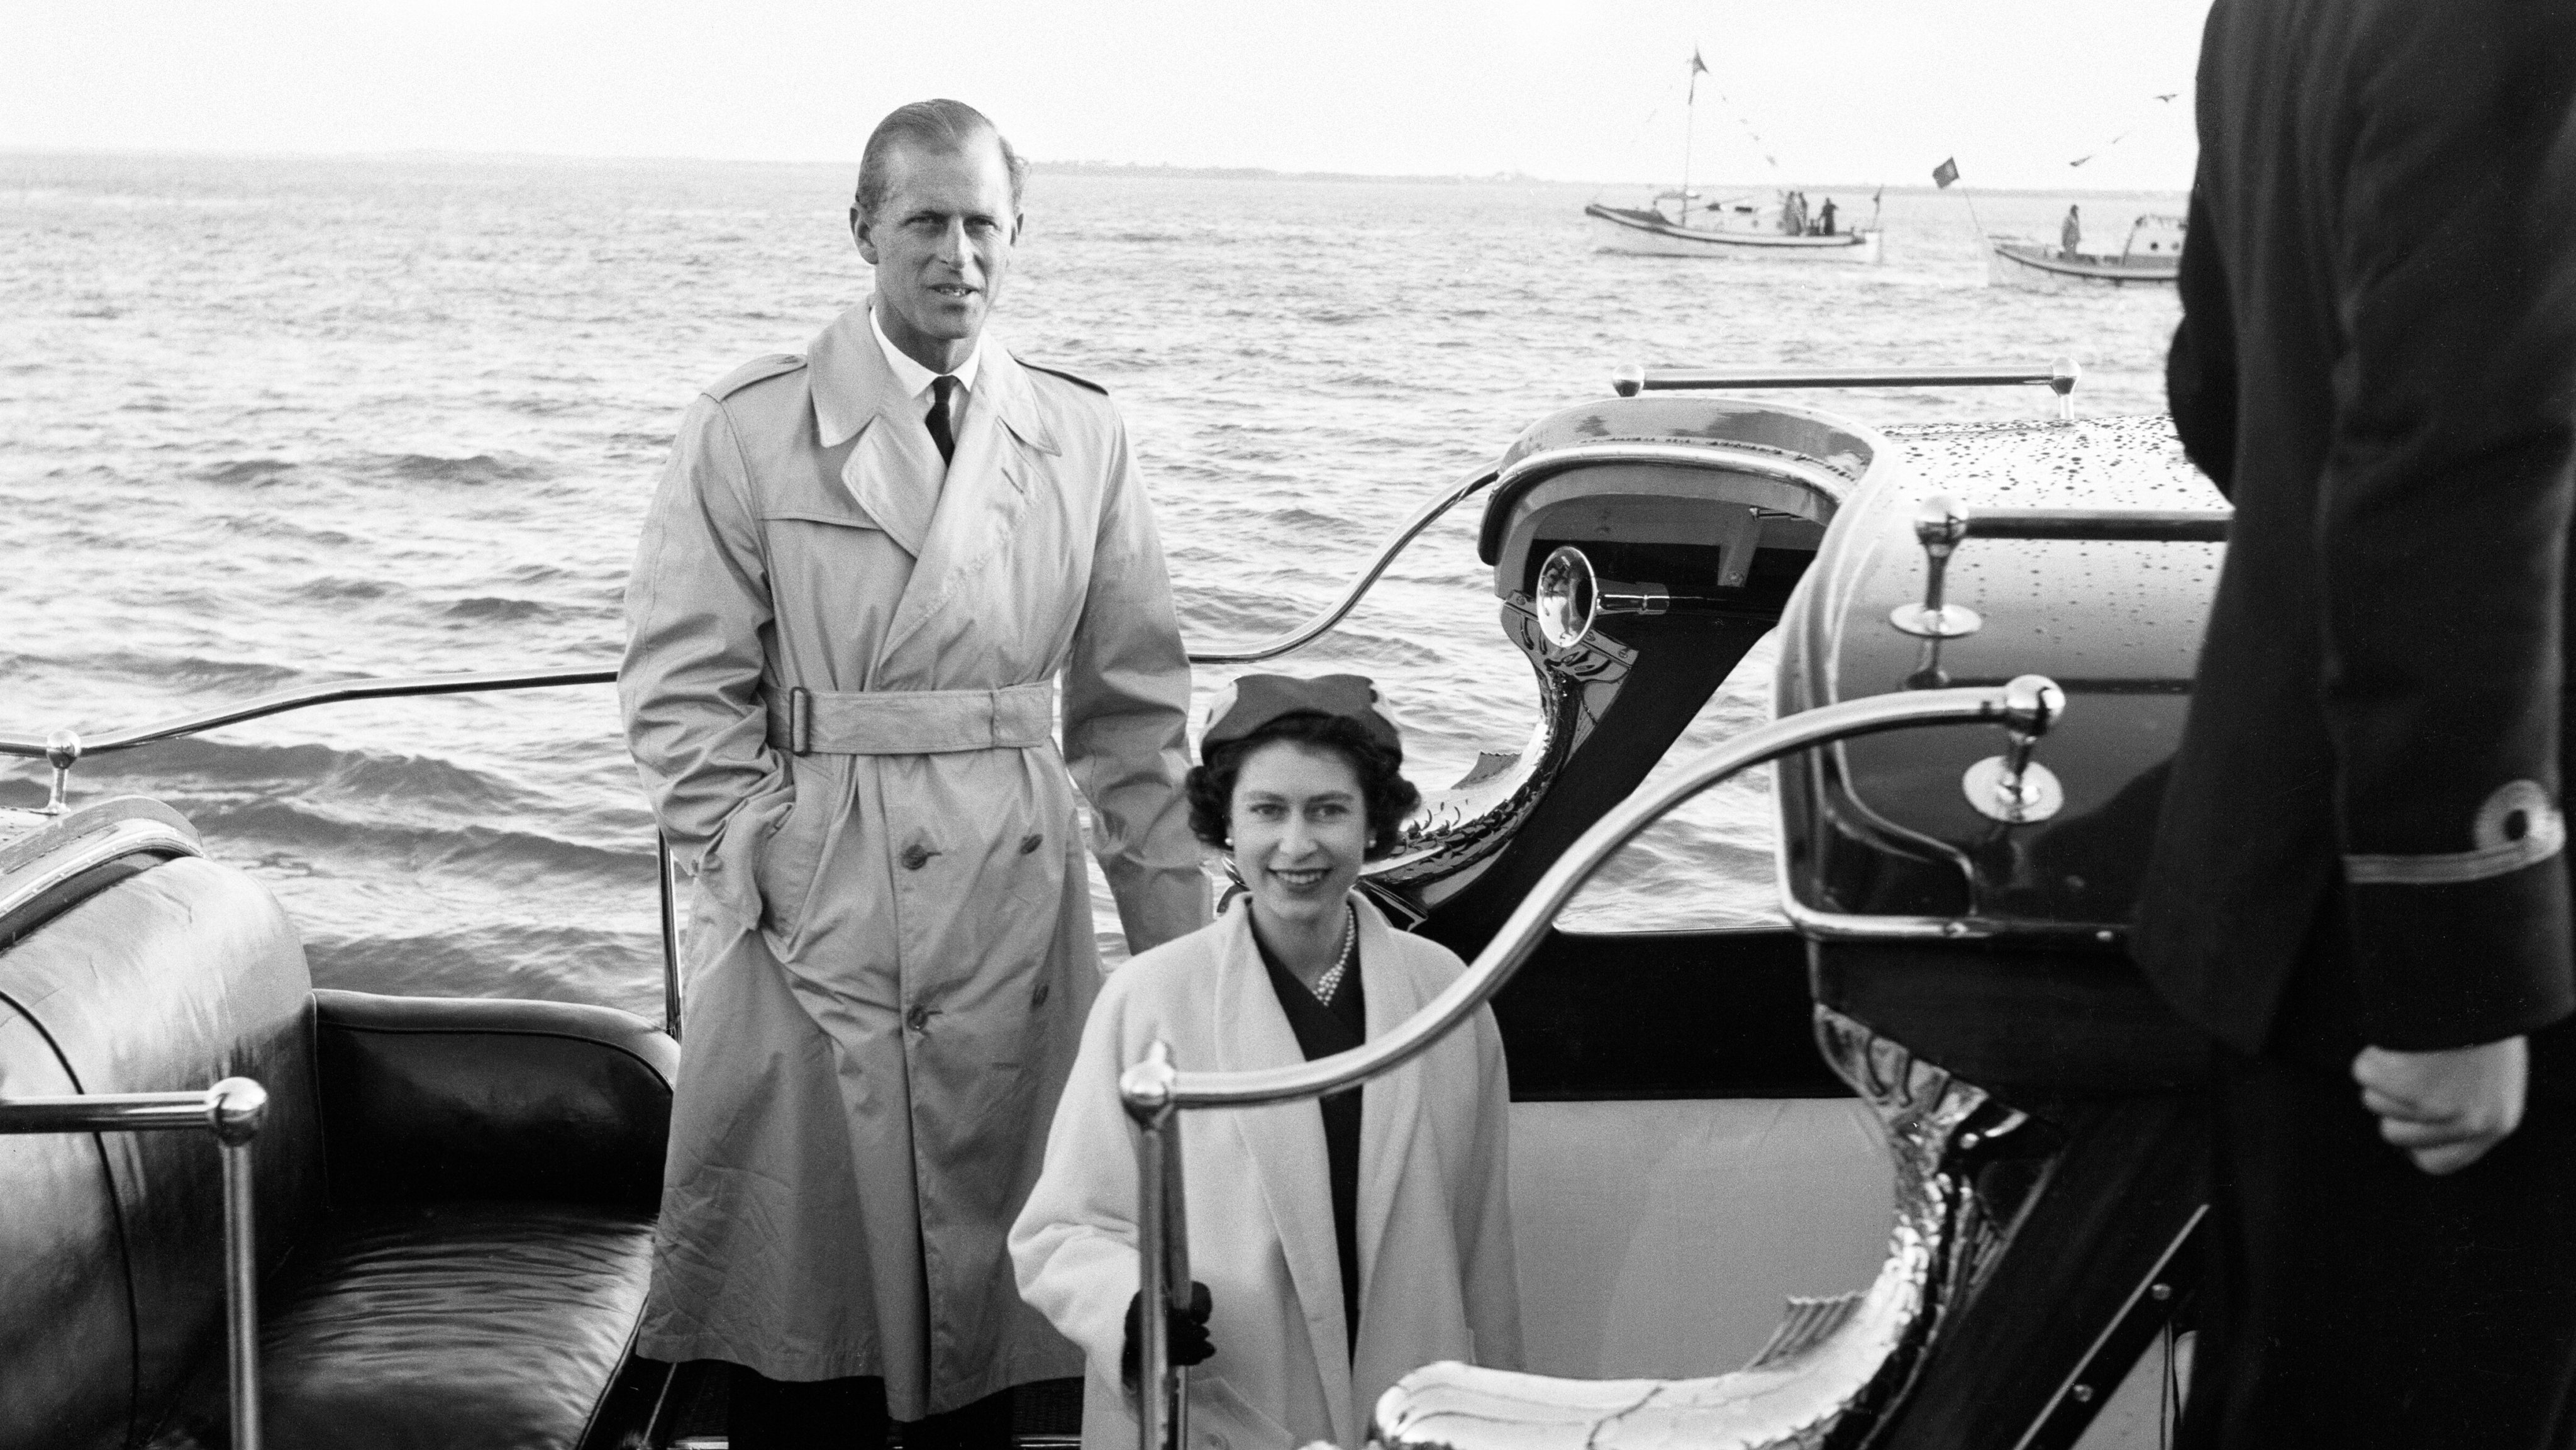 Queen Elizabeth II poses with her husband Prince Philip, the Duke of Edinburgh, after their reunion at Lisbon on the roy